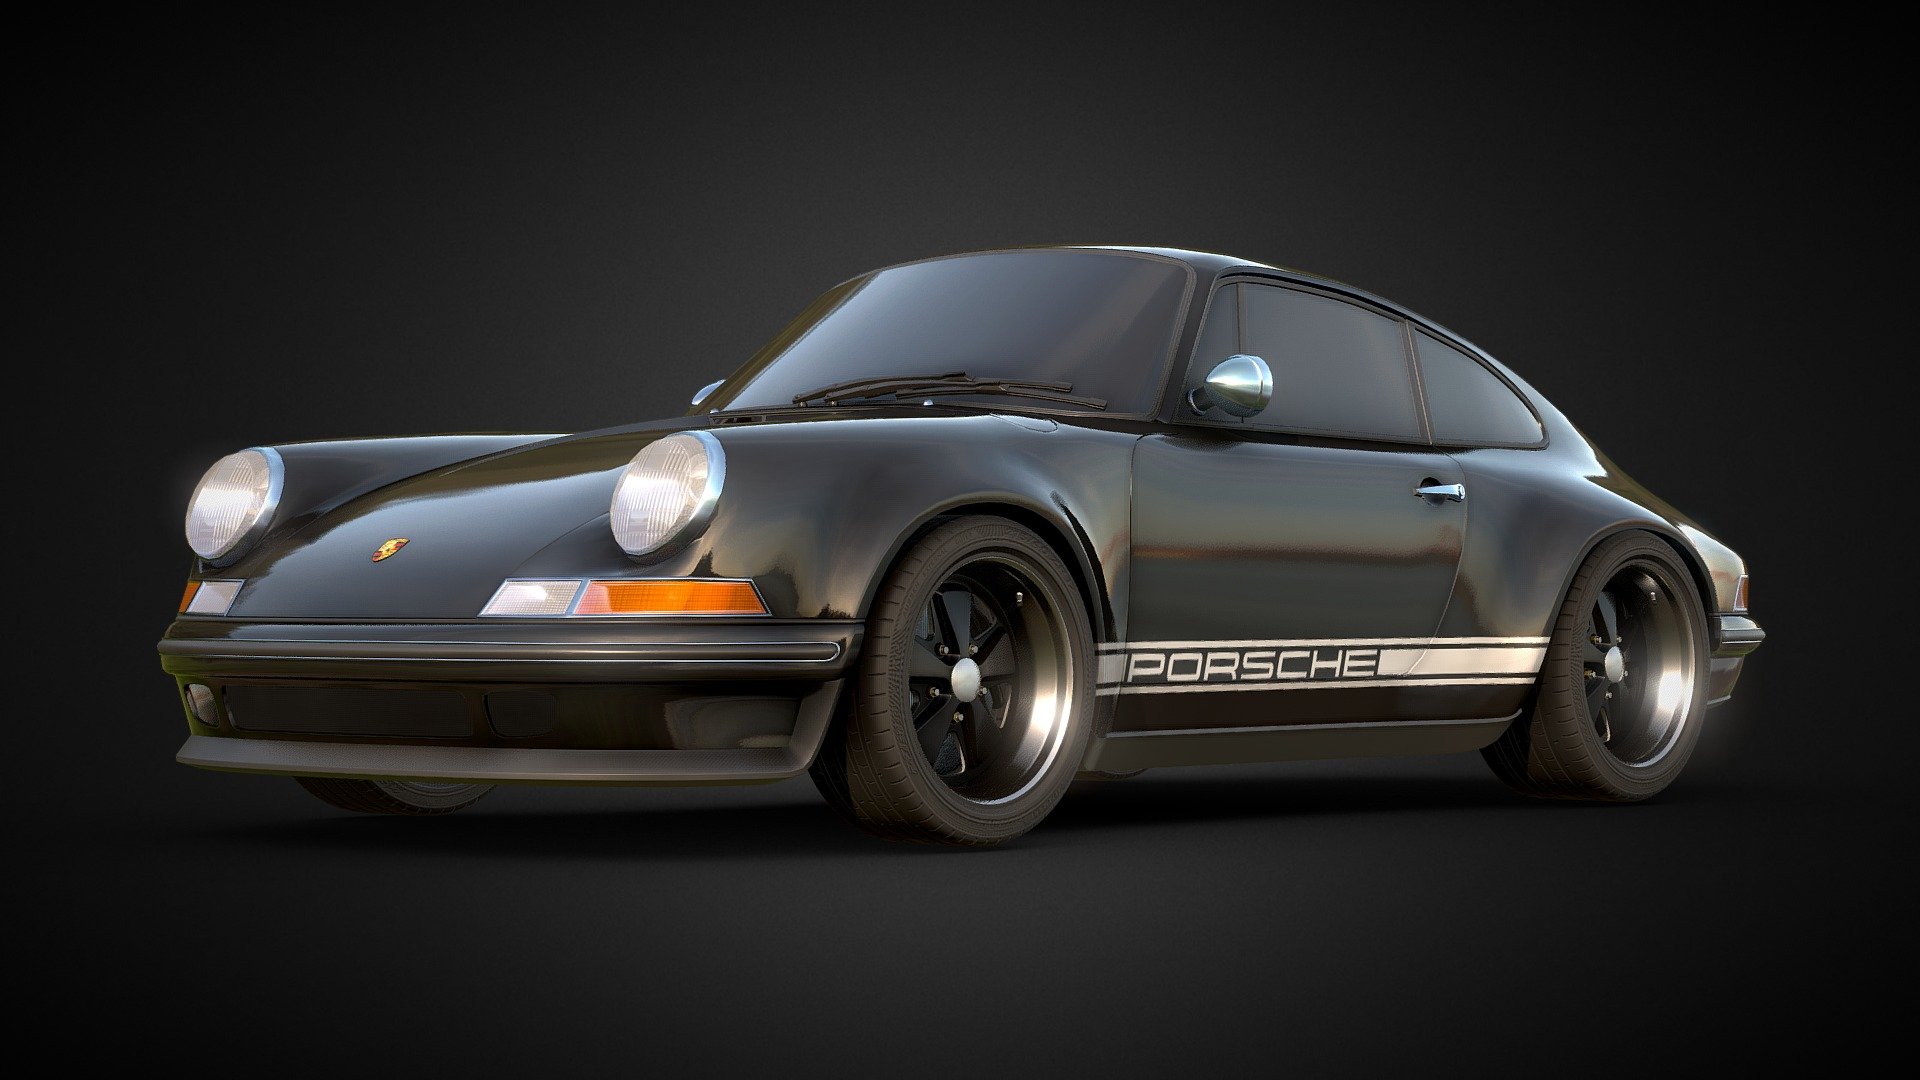 Porsche Singer 911 Turbo - Subdivision Model - PBR Materials
Game Ready / Unreal Engine / Unity - Directly import with texture maps and start using.
Contact me if you want the non triangulated version of this model - dsaalister@gmail.com
https://www.instagram.com/p/CRyxQlir2xN/ - Porsche Singer 911 Turbo - Buy Royalty Free 3D model by Allay Design (@Alister.Dsa) 3d model